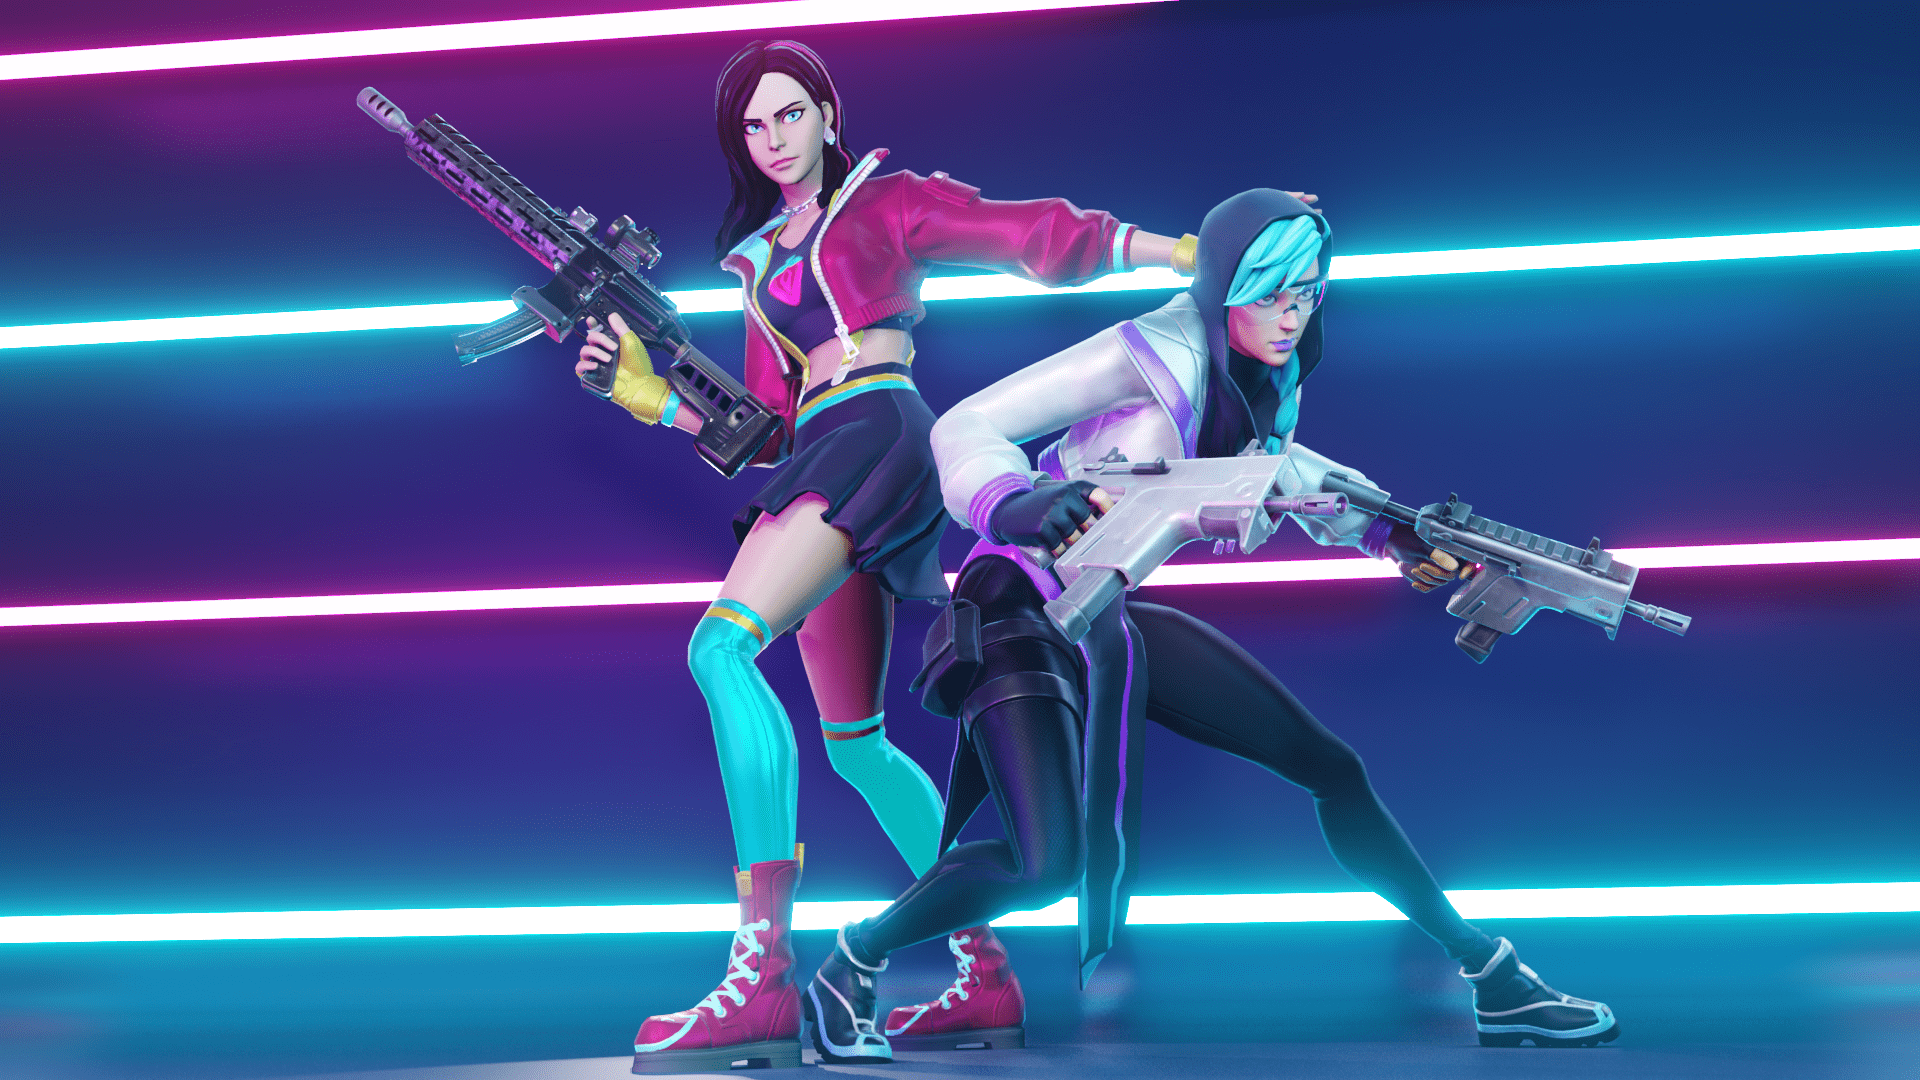 Neon Fortnite Wallpapers Top Free Neon Fortnite Backgrounds Wallpaperaccess